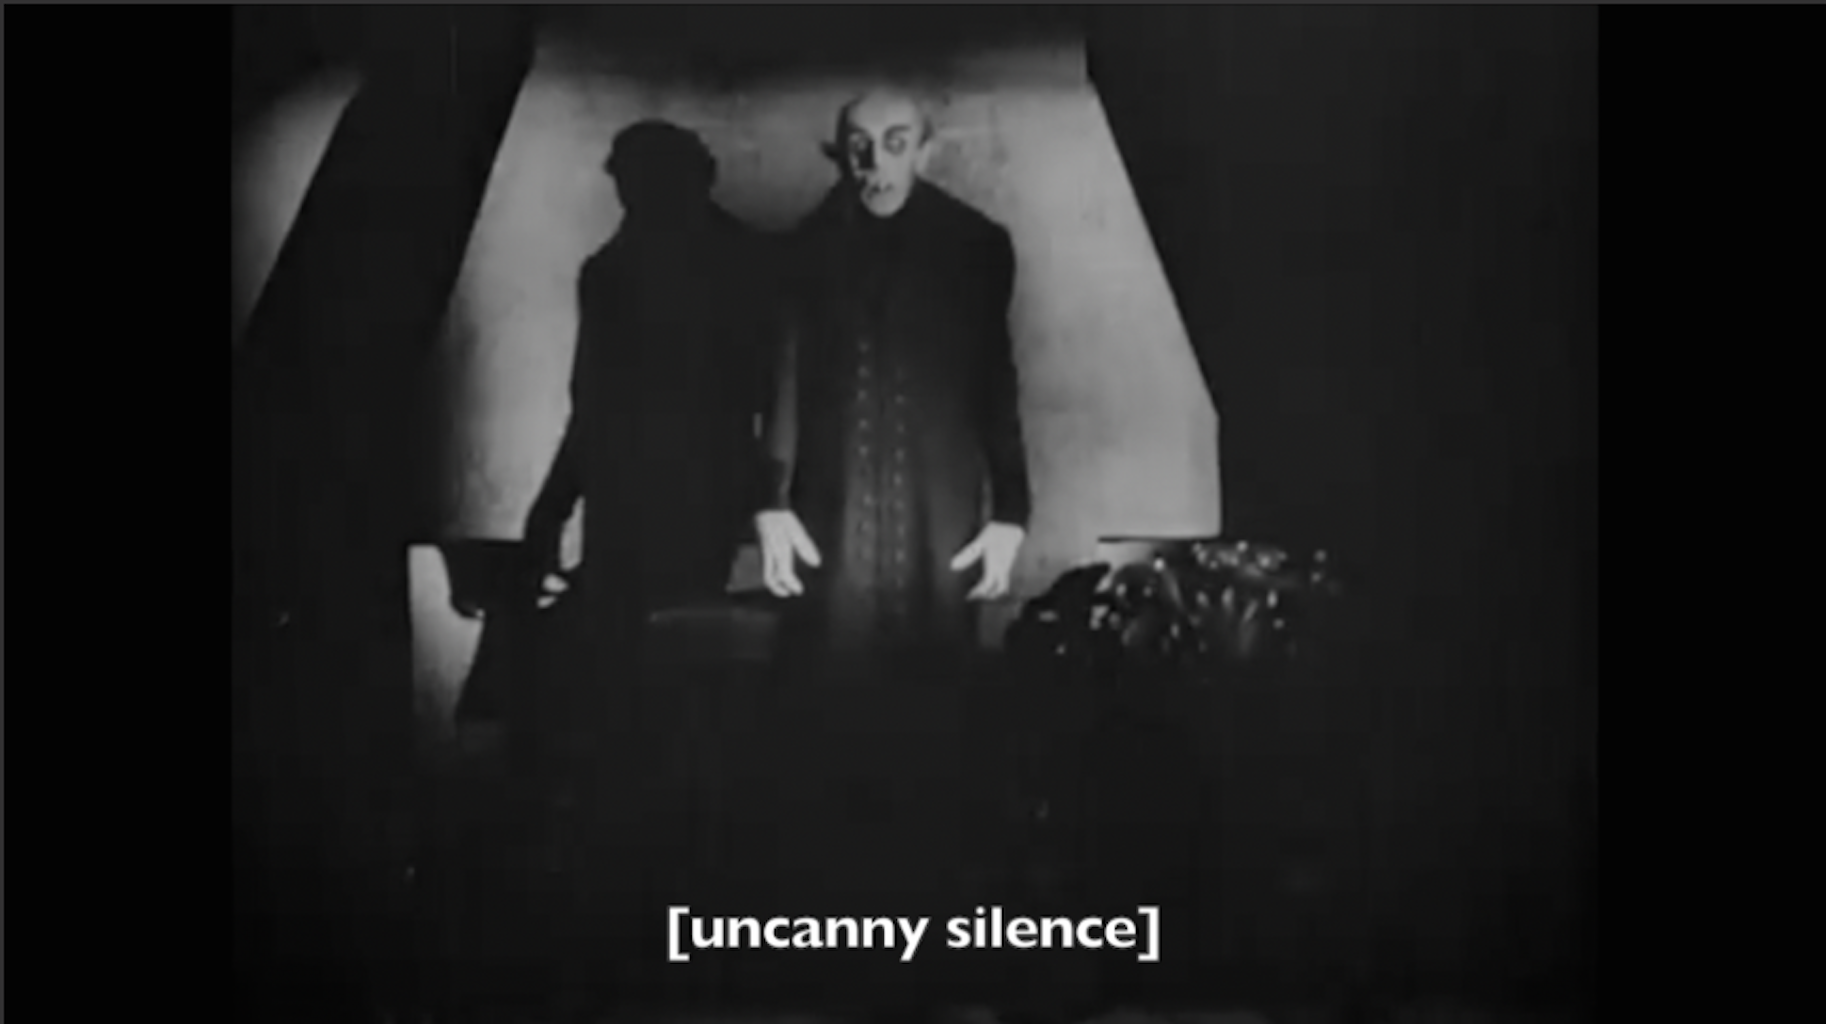 Image of Nosferatu with a caption that reads "uncanny silence" in brackets.